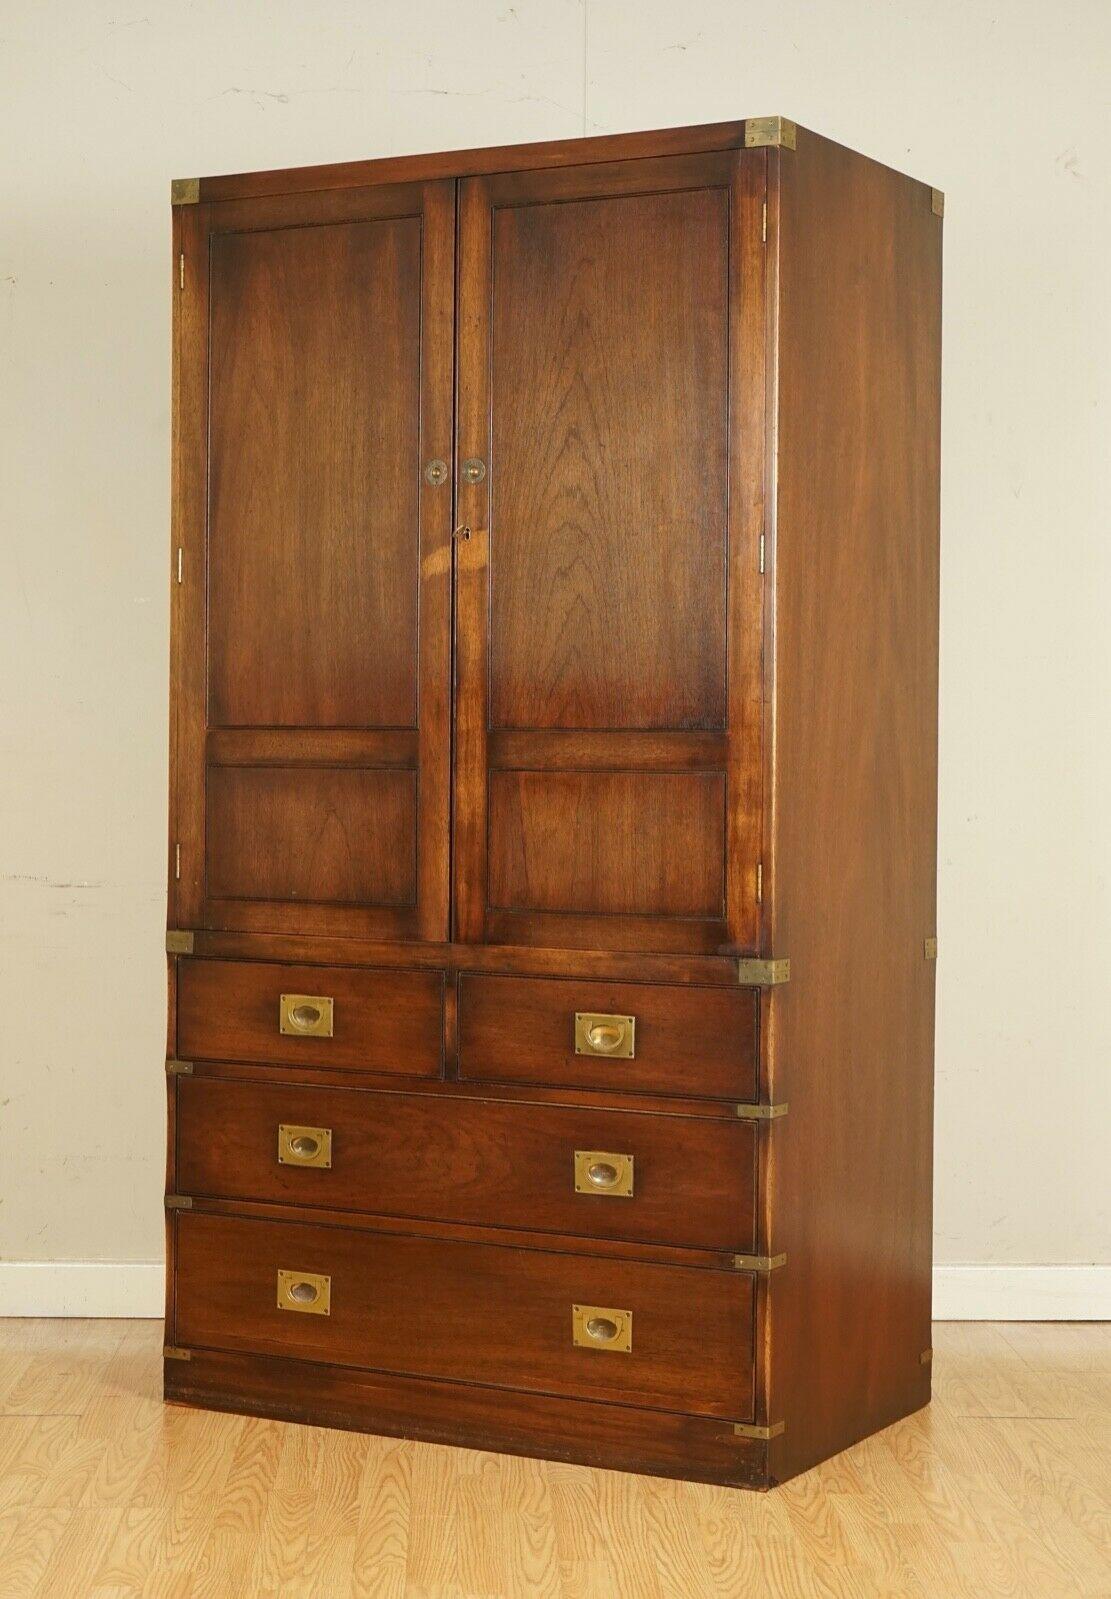 Stunning Bevan and Funnel Military Campaign Wardrobe/Cabinet with Brass Handles 8